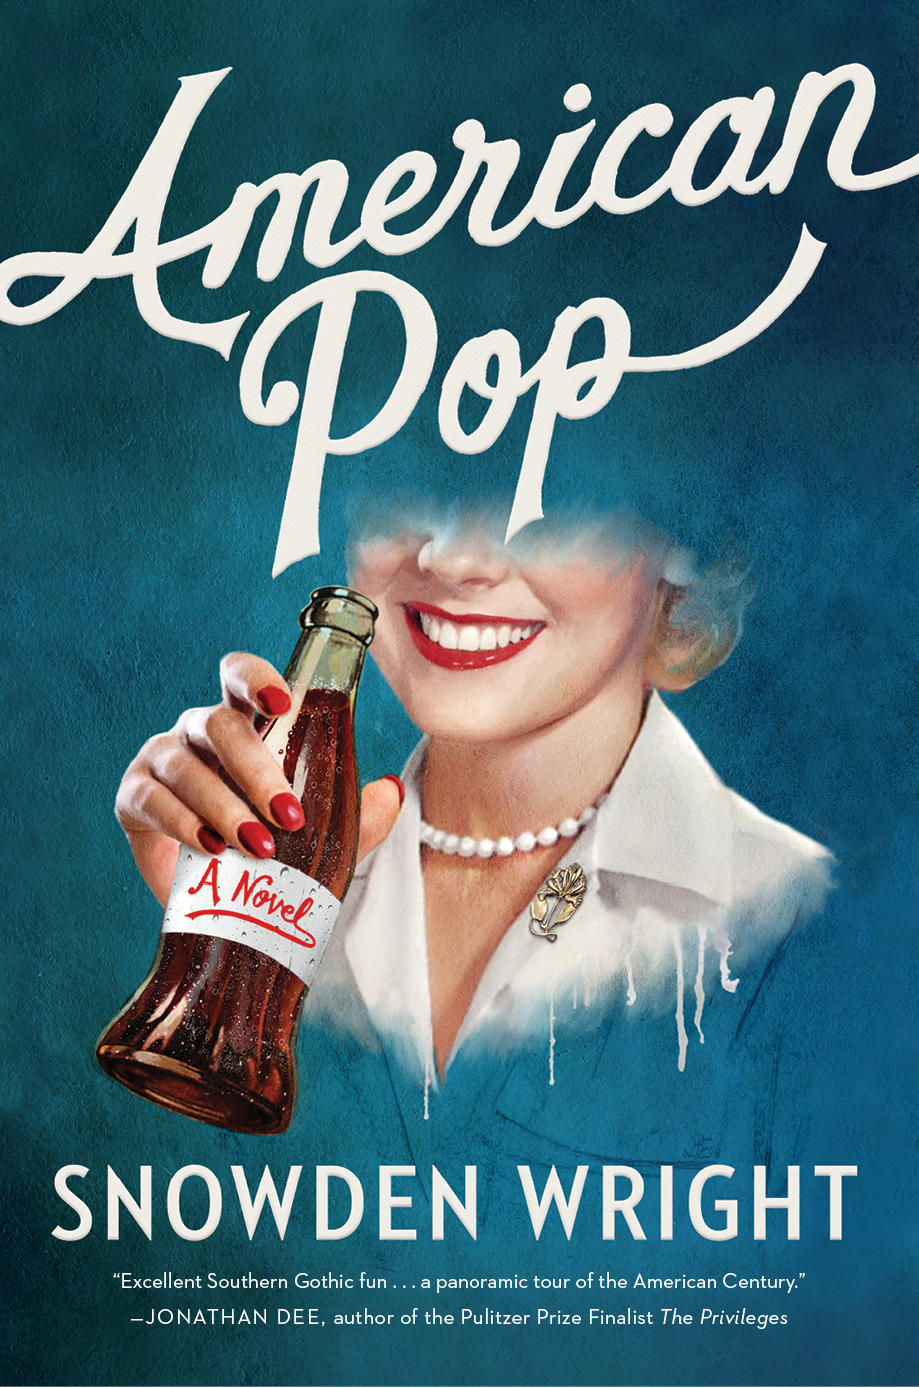 "American Pop" is author Snowden Wright's novel about the Forster family, a Southern dynasty built on a lucrative cola company.